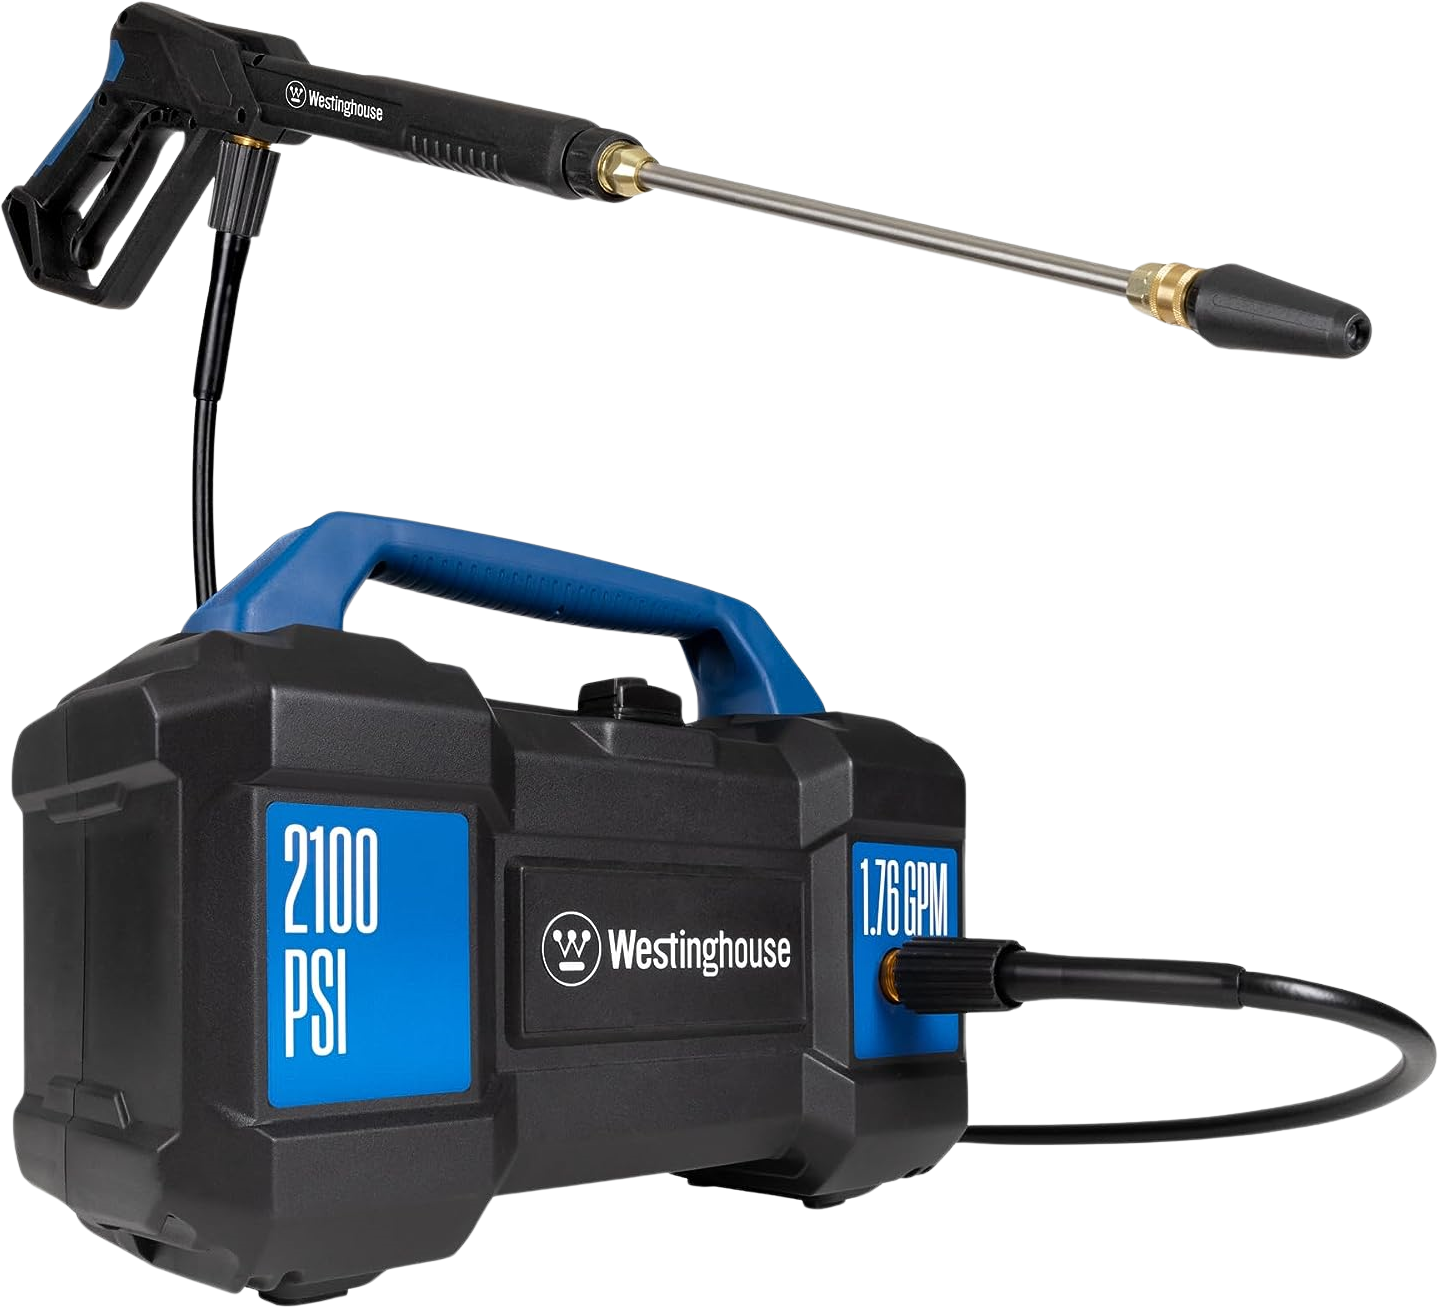 Westinghouse, Westinghouse ePX3100v Electric Pressure Washer 2100 PSI 1.76 GPM New